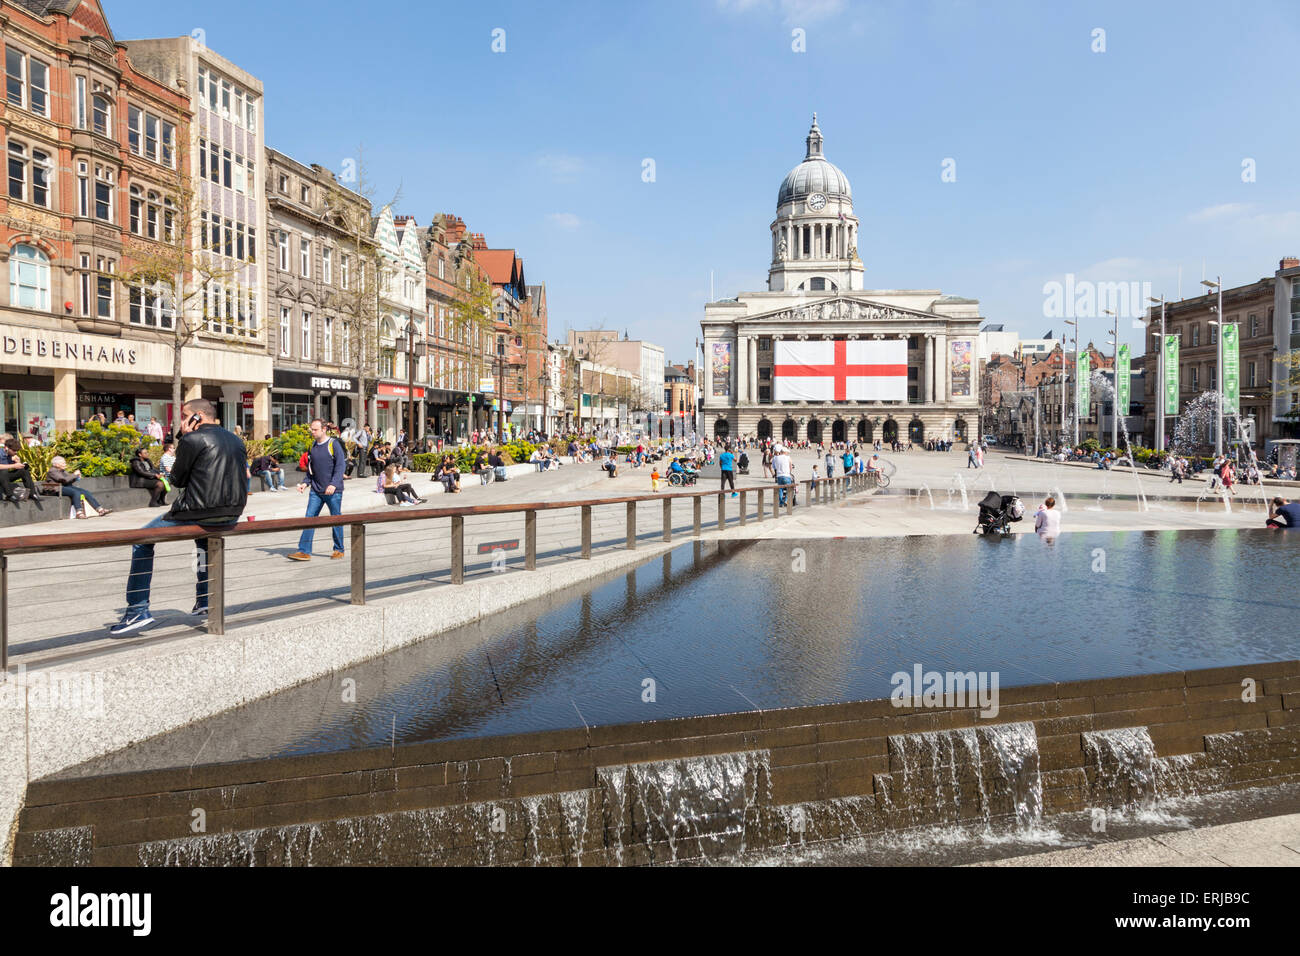 People in The Old Market Square with Council House and English flag in the distance, Nottingham, England, UK Stock Photo